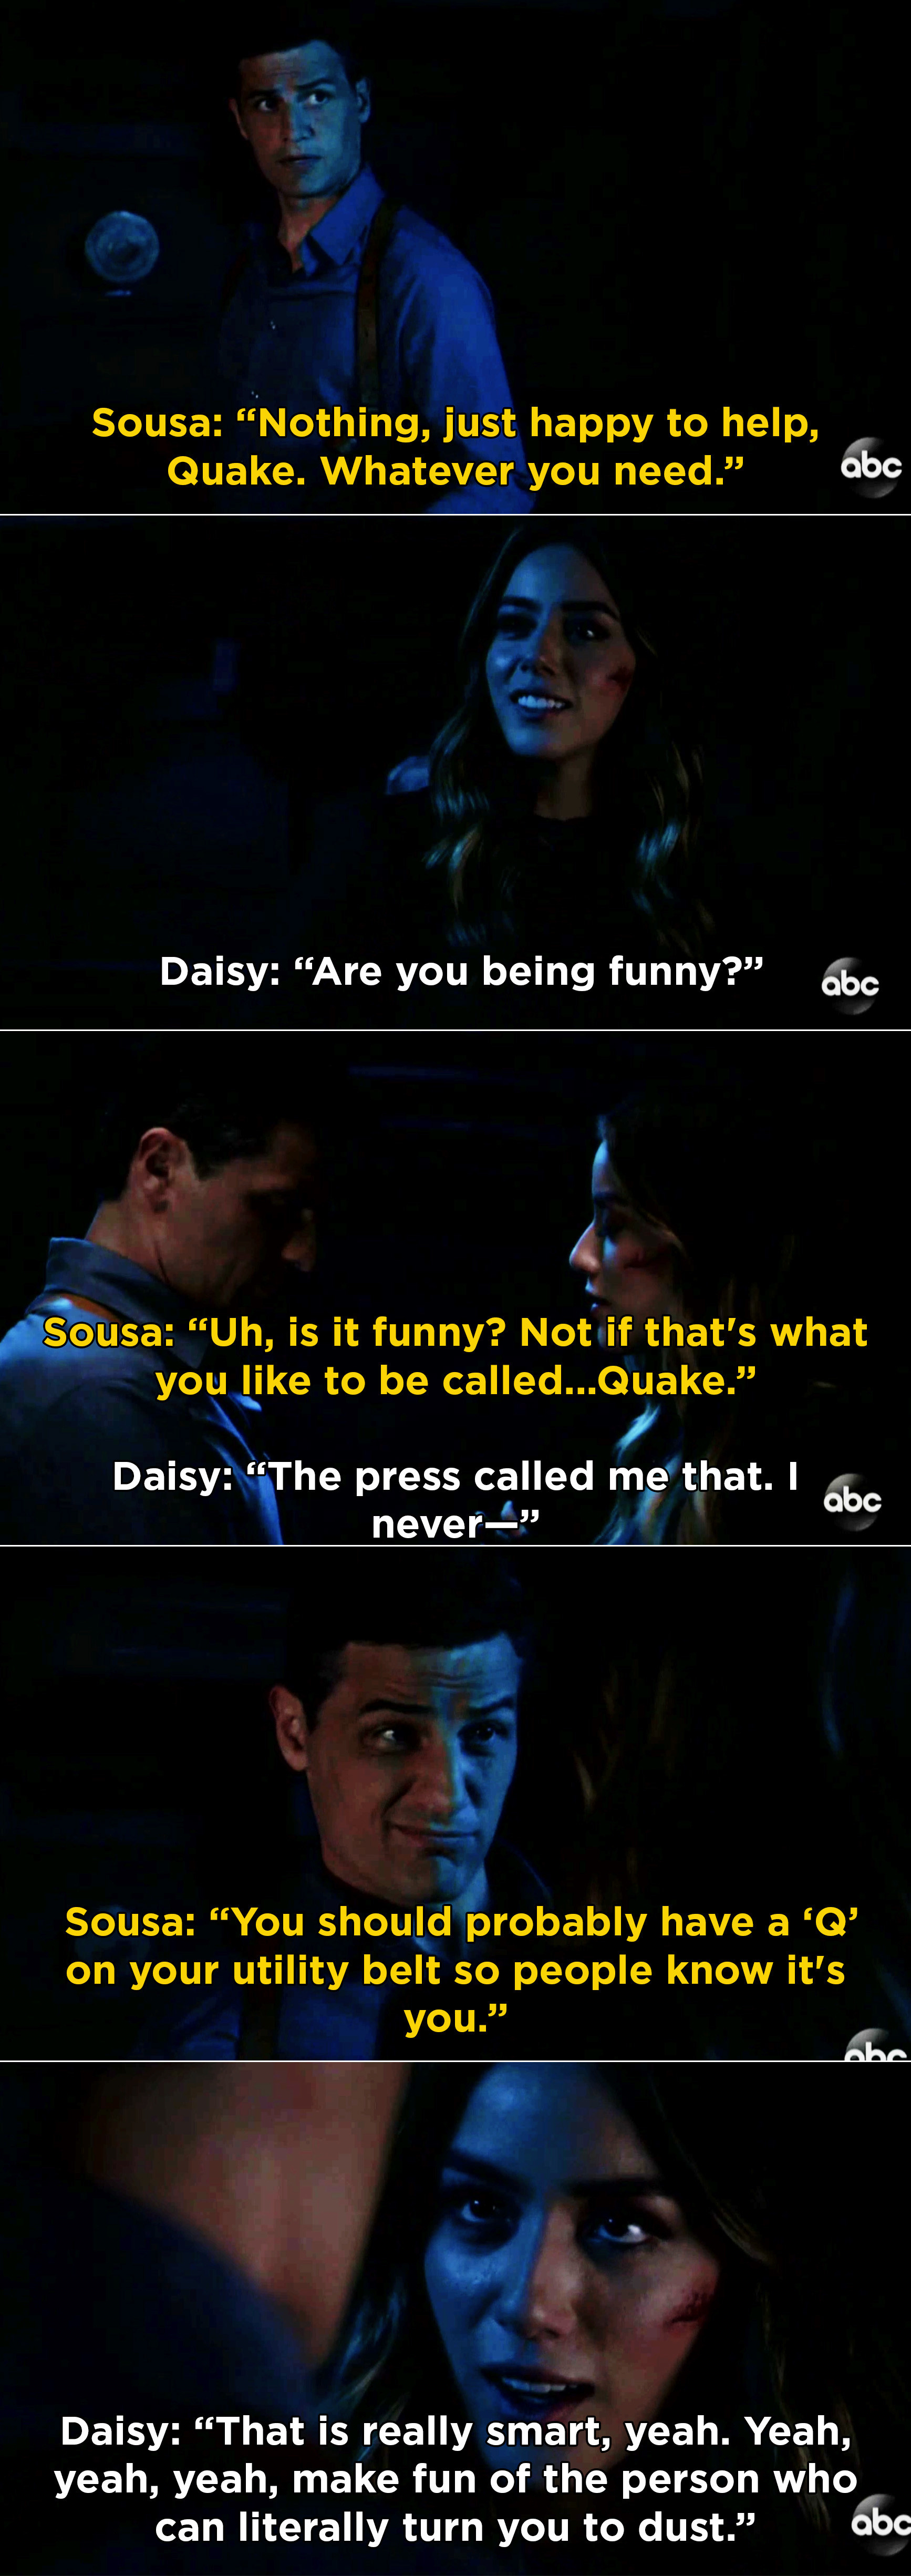 Sousa and Daisy flirting and Sousa making fun of Daisy&#x27;s nickname &quot;Quake&quot;